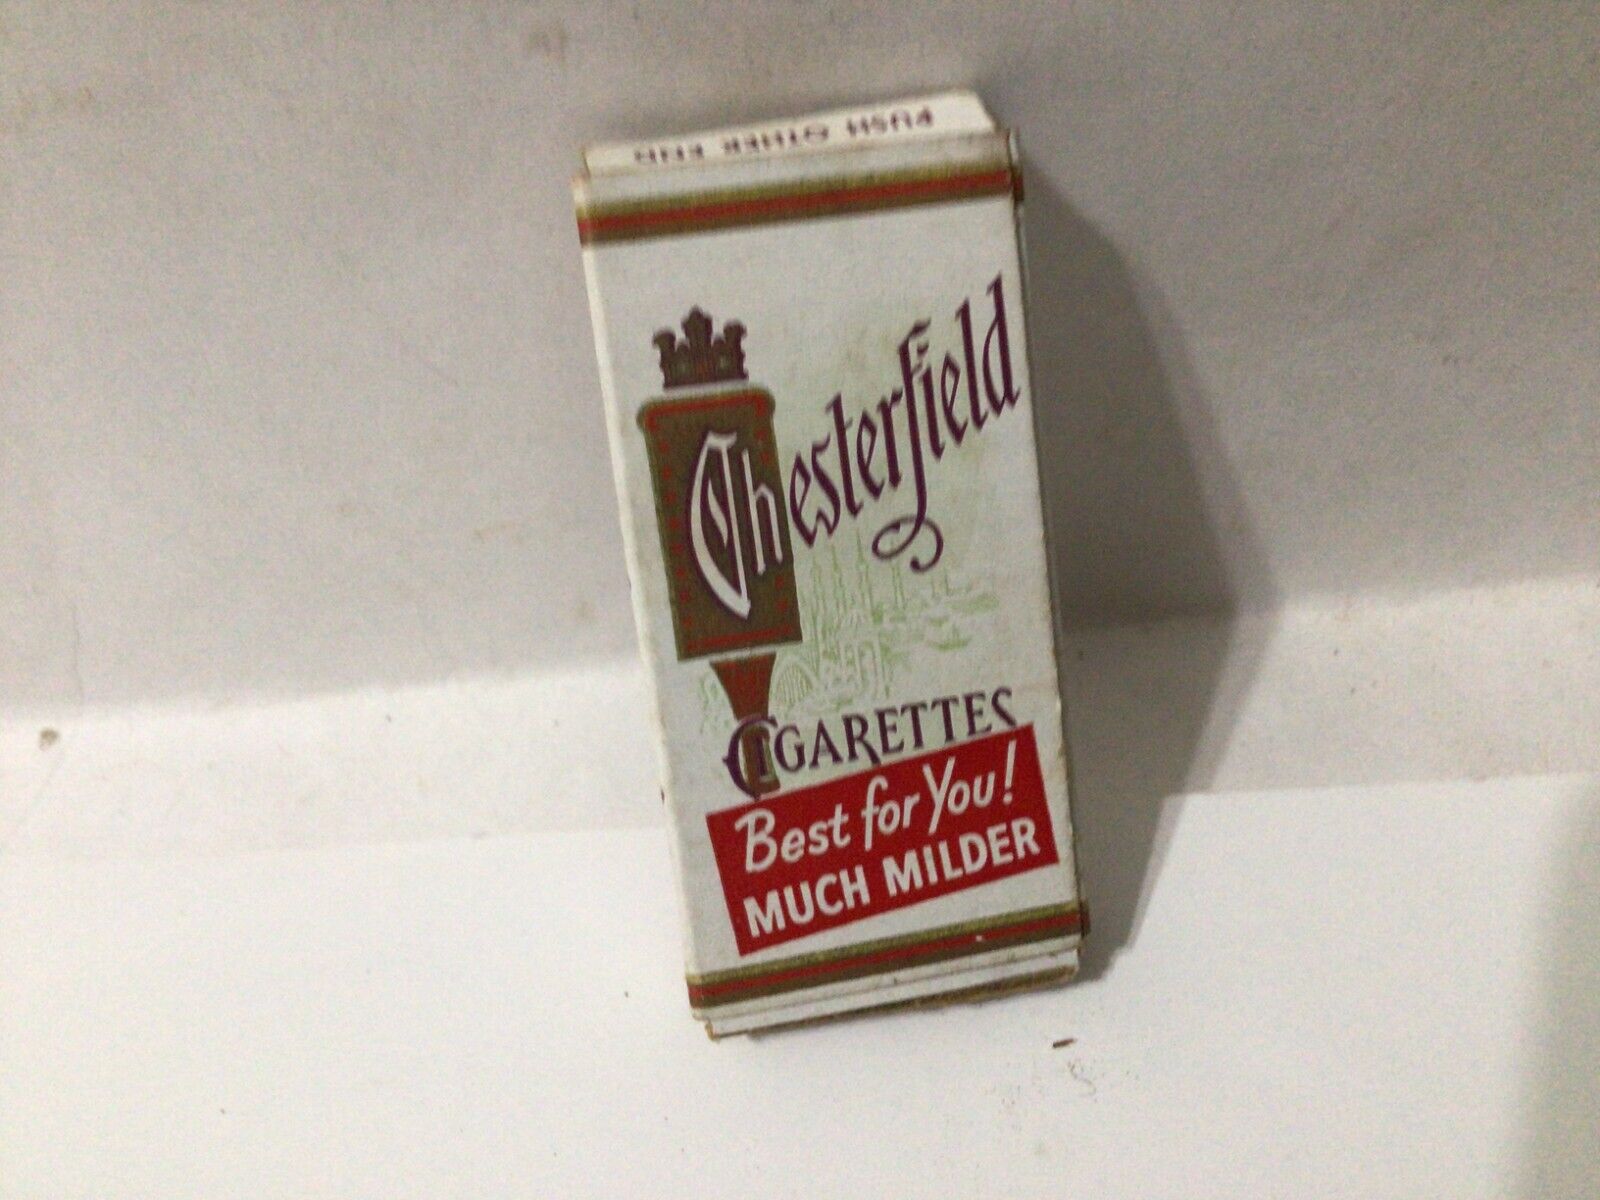 Chesterfield Complimentary 3 Pack Cigarette Box, Not For Sale, Empty